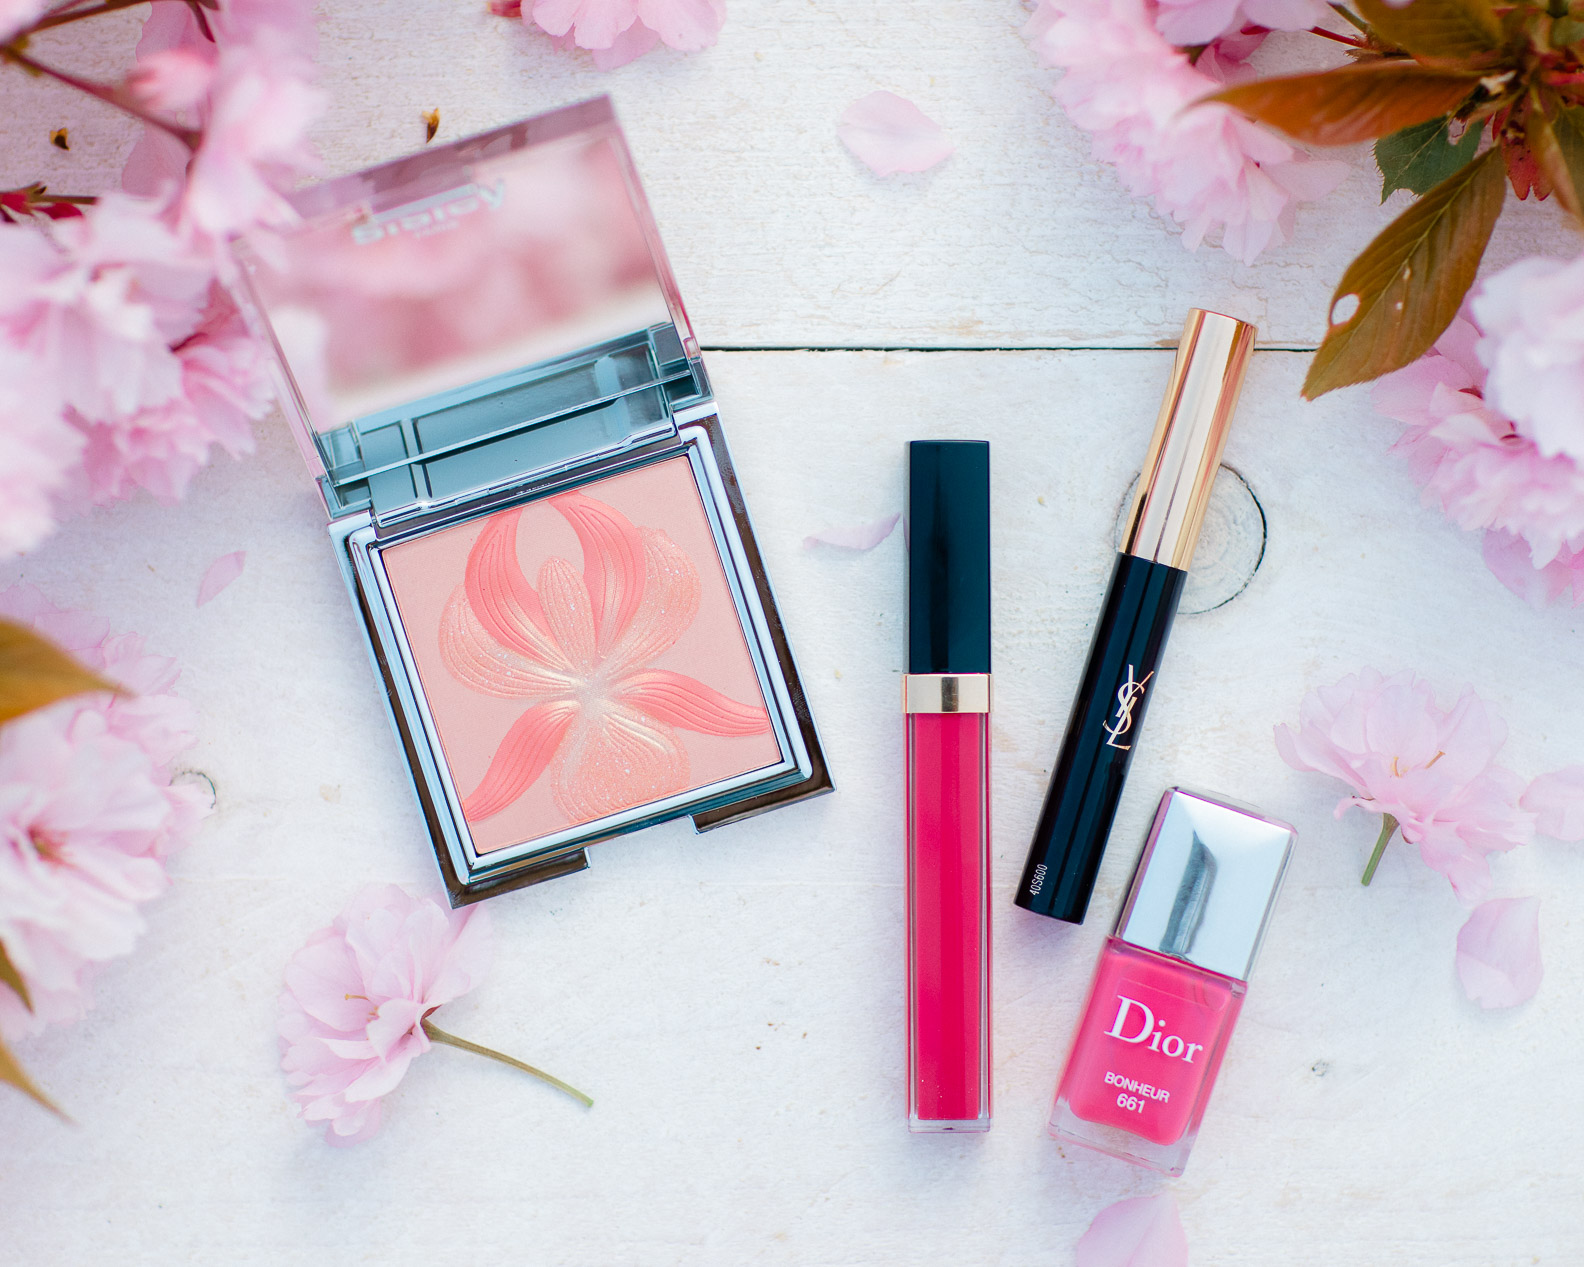 chanel rouge coco gloss yves saint laurent couture eyeliner dior vernis a ongles sisley palette l orchidee blush illuminateur notino olivia poncelet